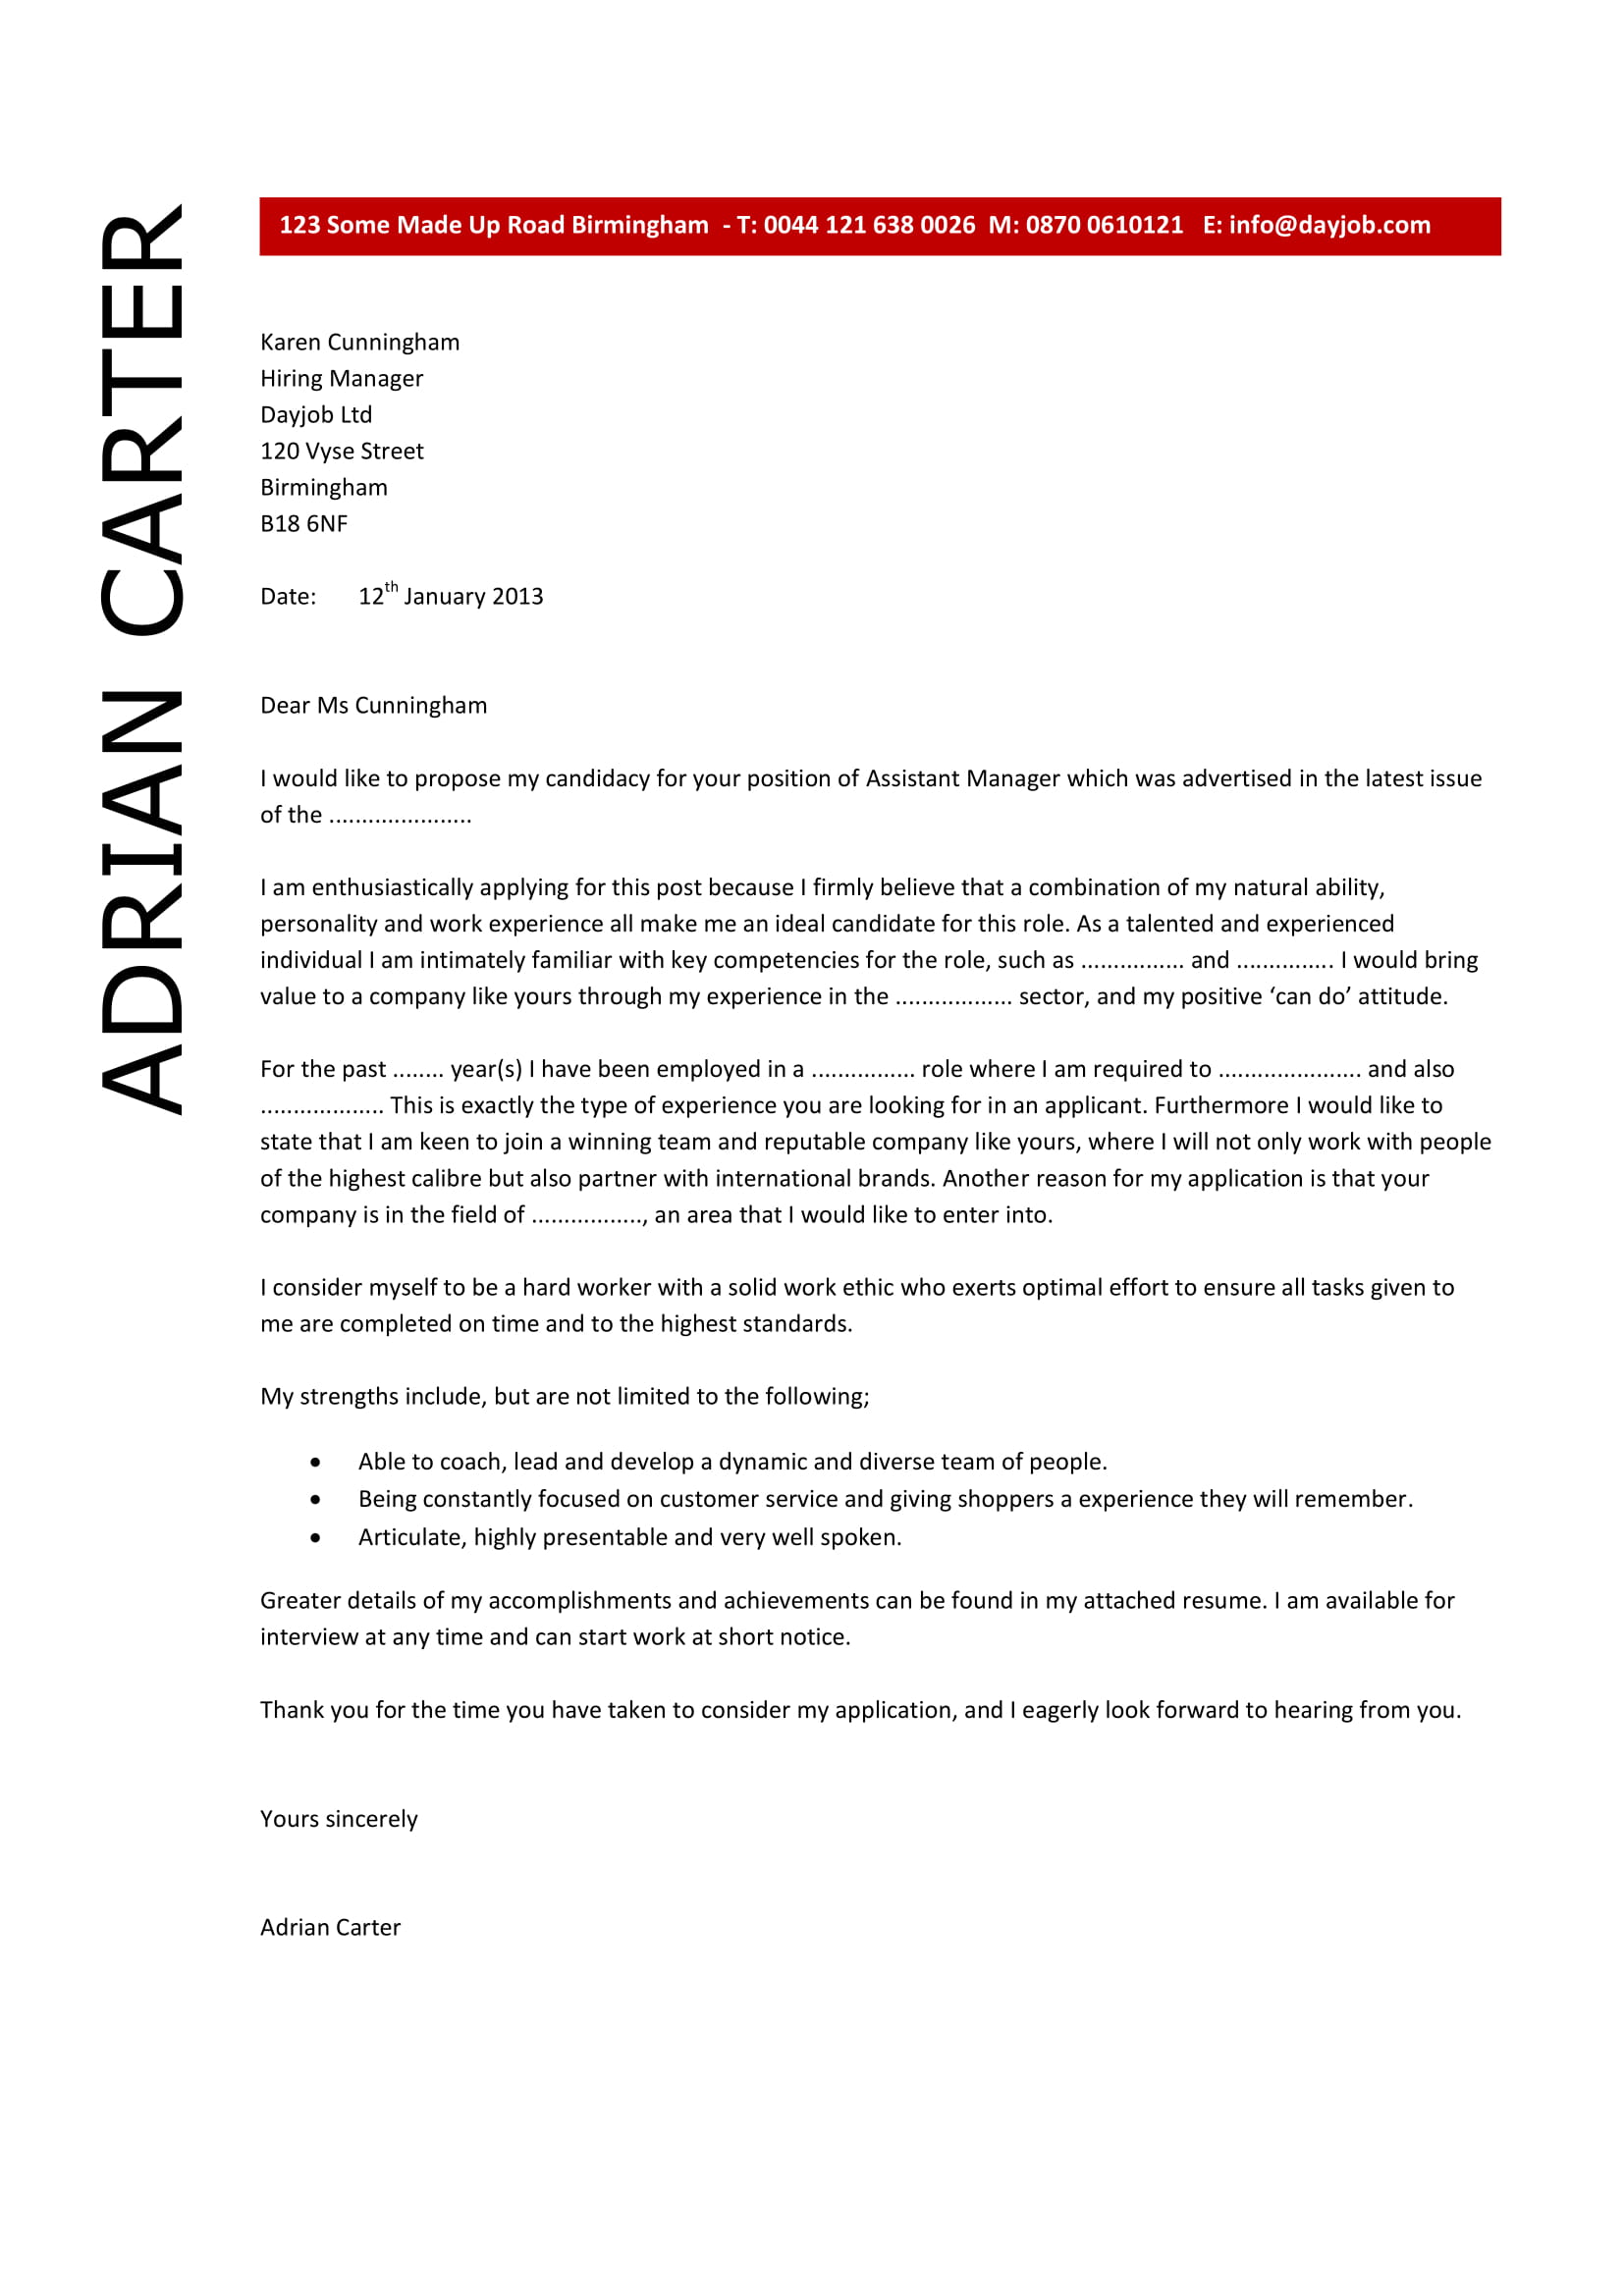 assistant manager cover letter example